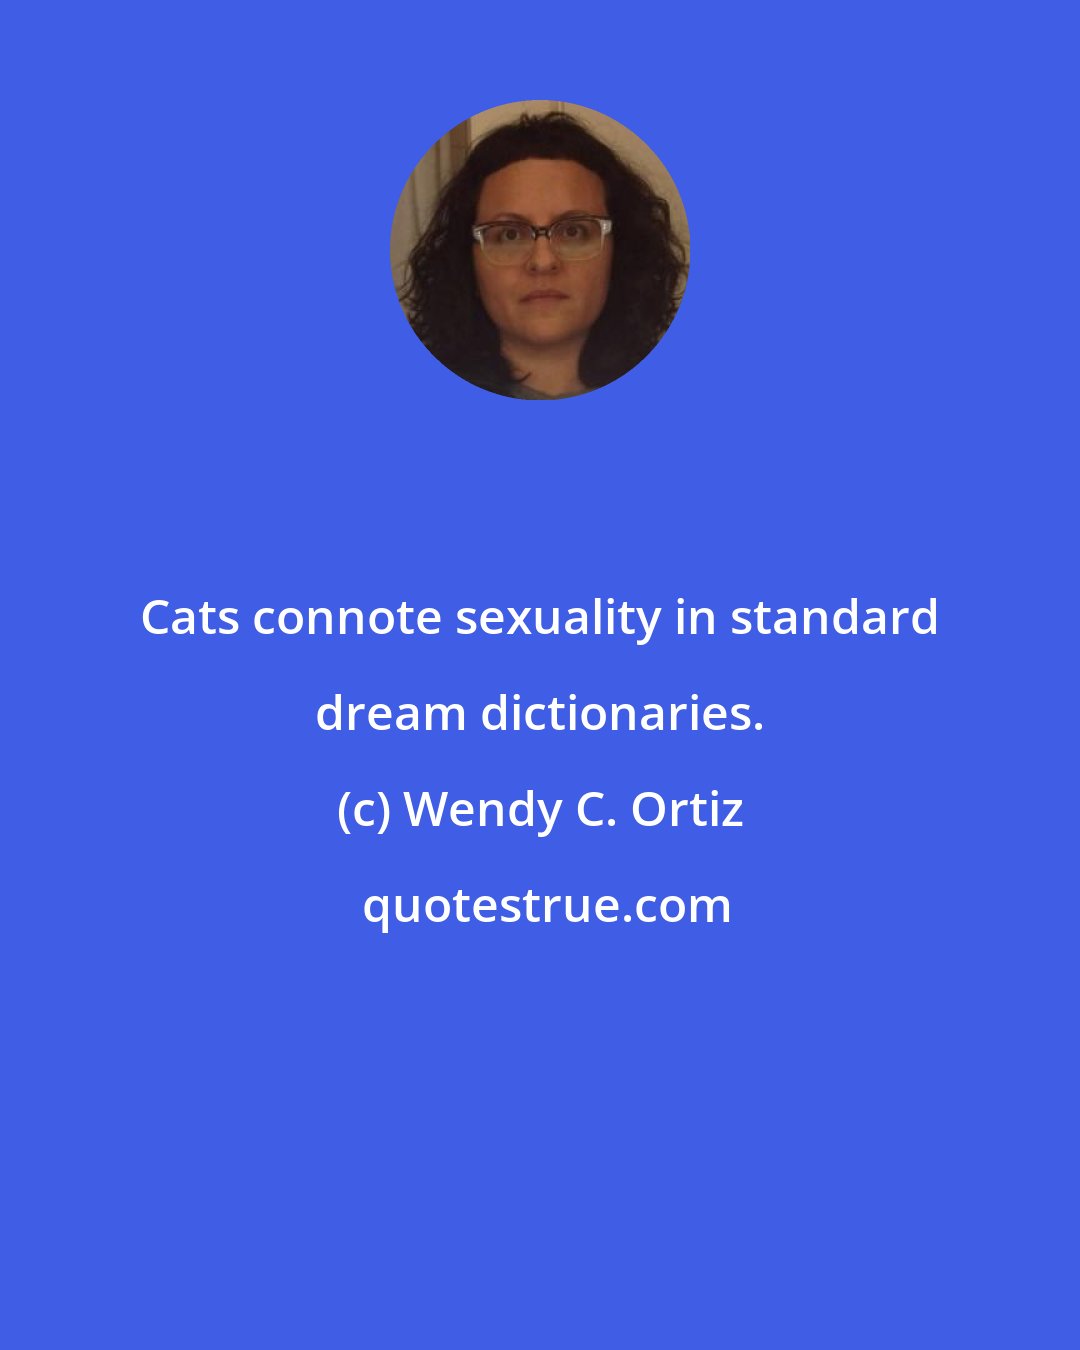 Wendy C. Ortiz: Cats connote sexuality in standard dream dictionaries.